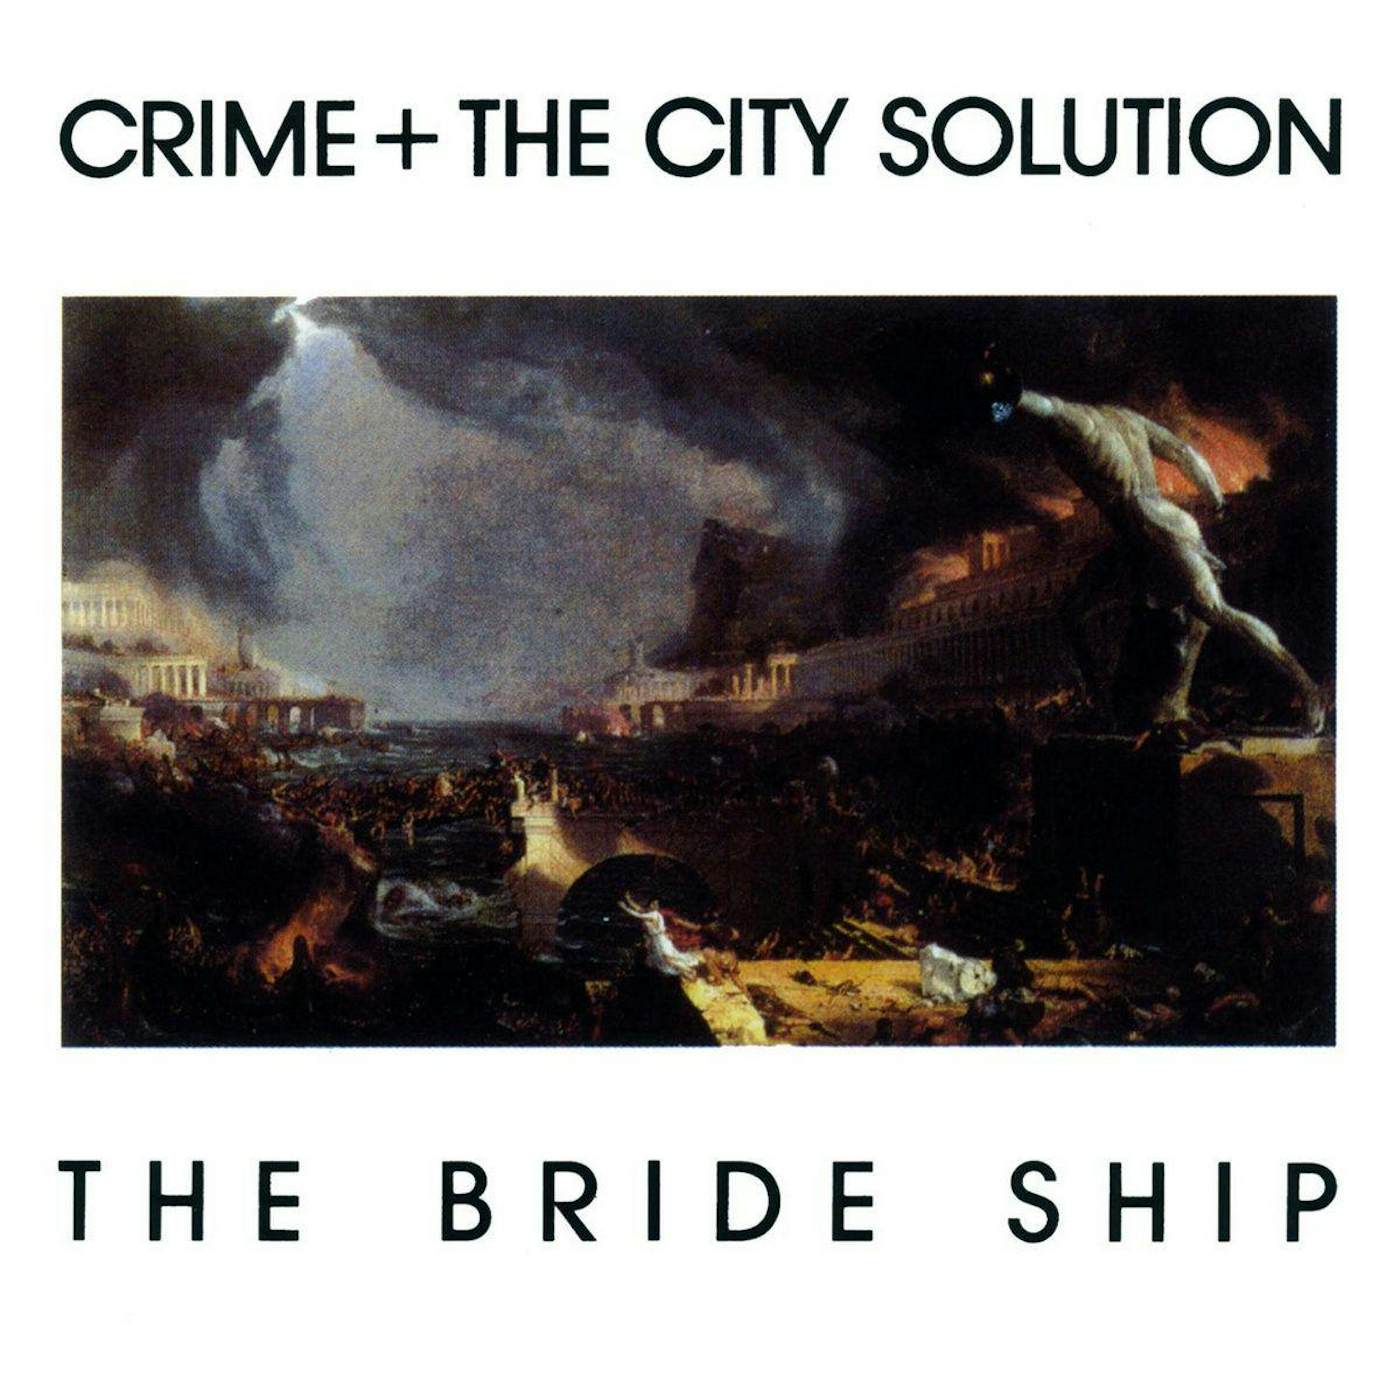 Crime & the City Solution Bride Ship (Limited Edition/White) Vinyl Record